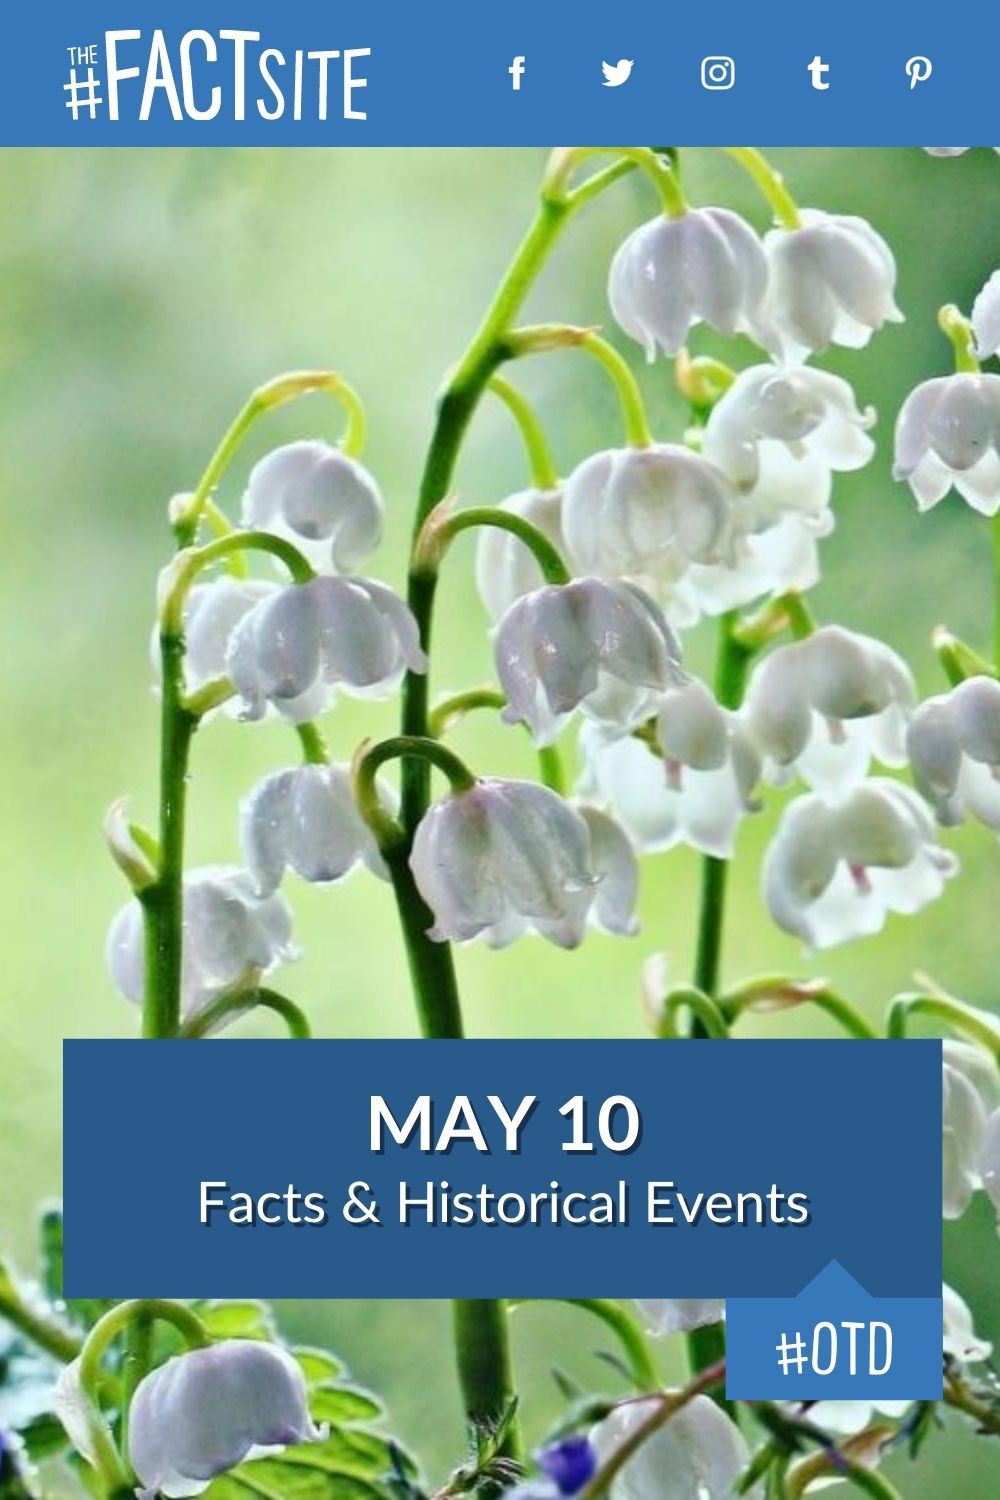 Facts & Historic Events That Happened on May 10